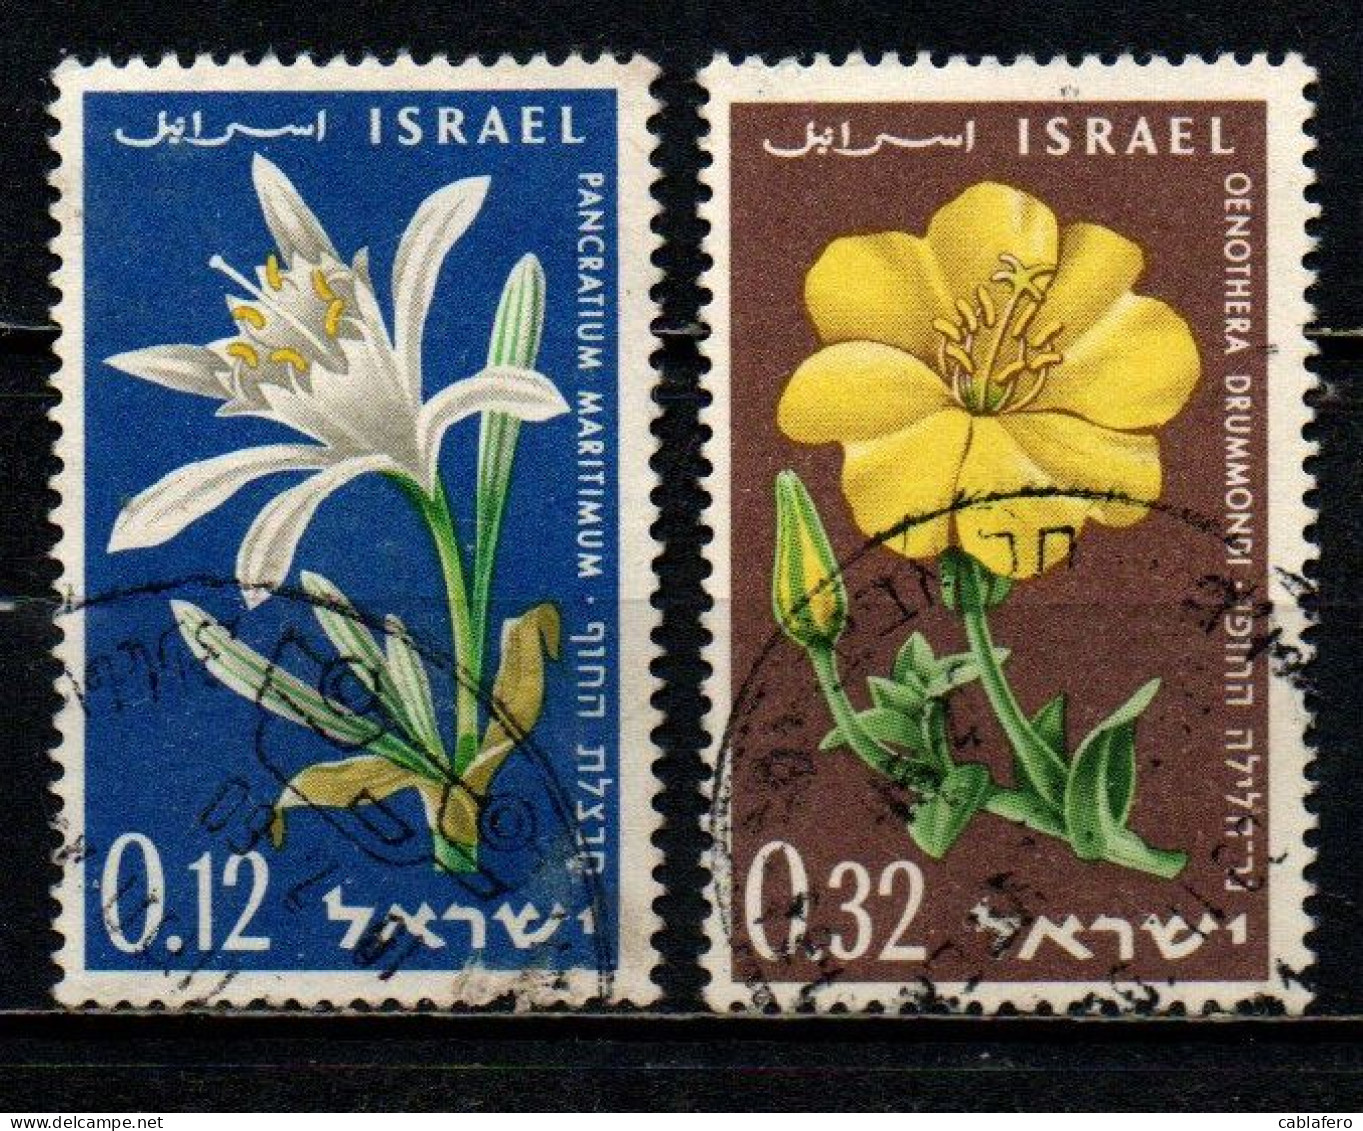 ISRAELE - 1960 - Sand Lily And Evening Primrose - Memorial Day; Proclamation Of State Of Israel, 12th Anniv - USATI - Used Stamps (without Tabs)